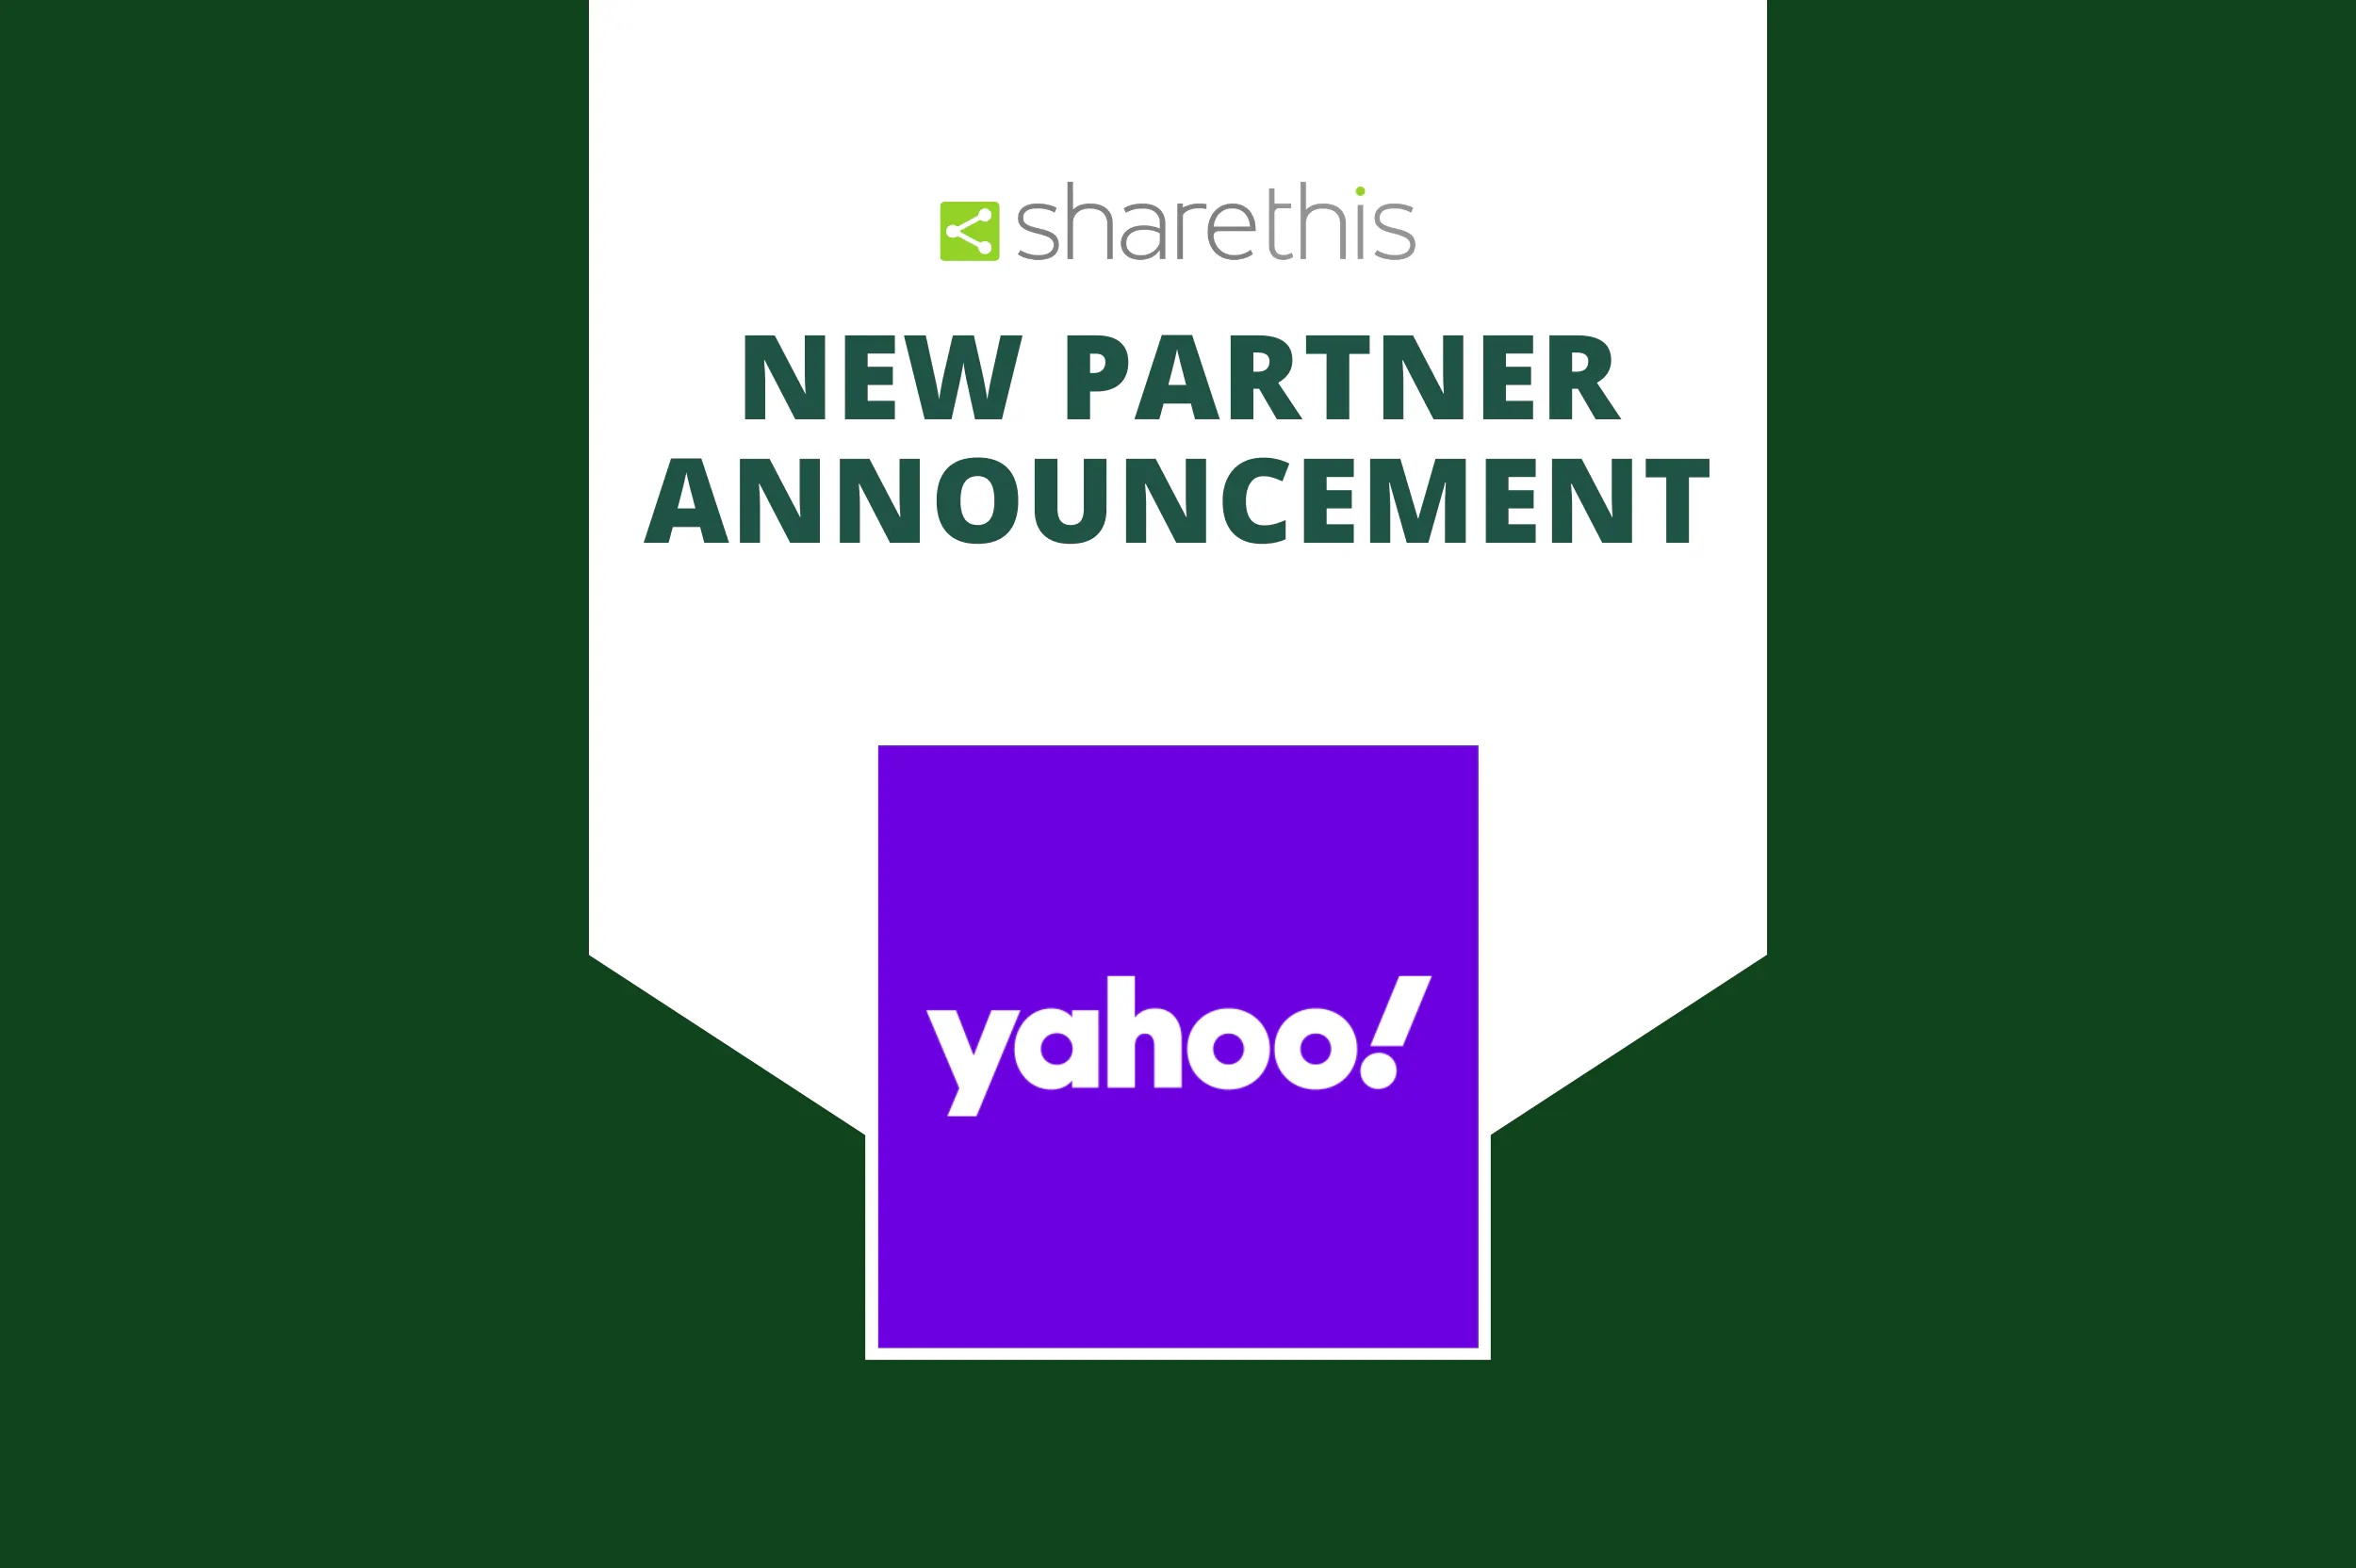 New Partnership Announcement with Yahoo ConnectID